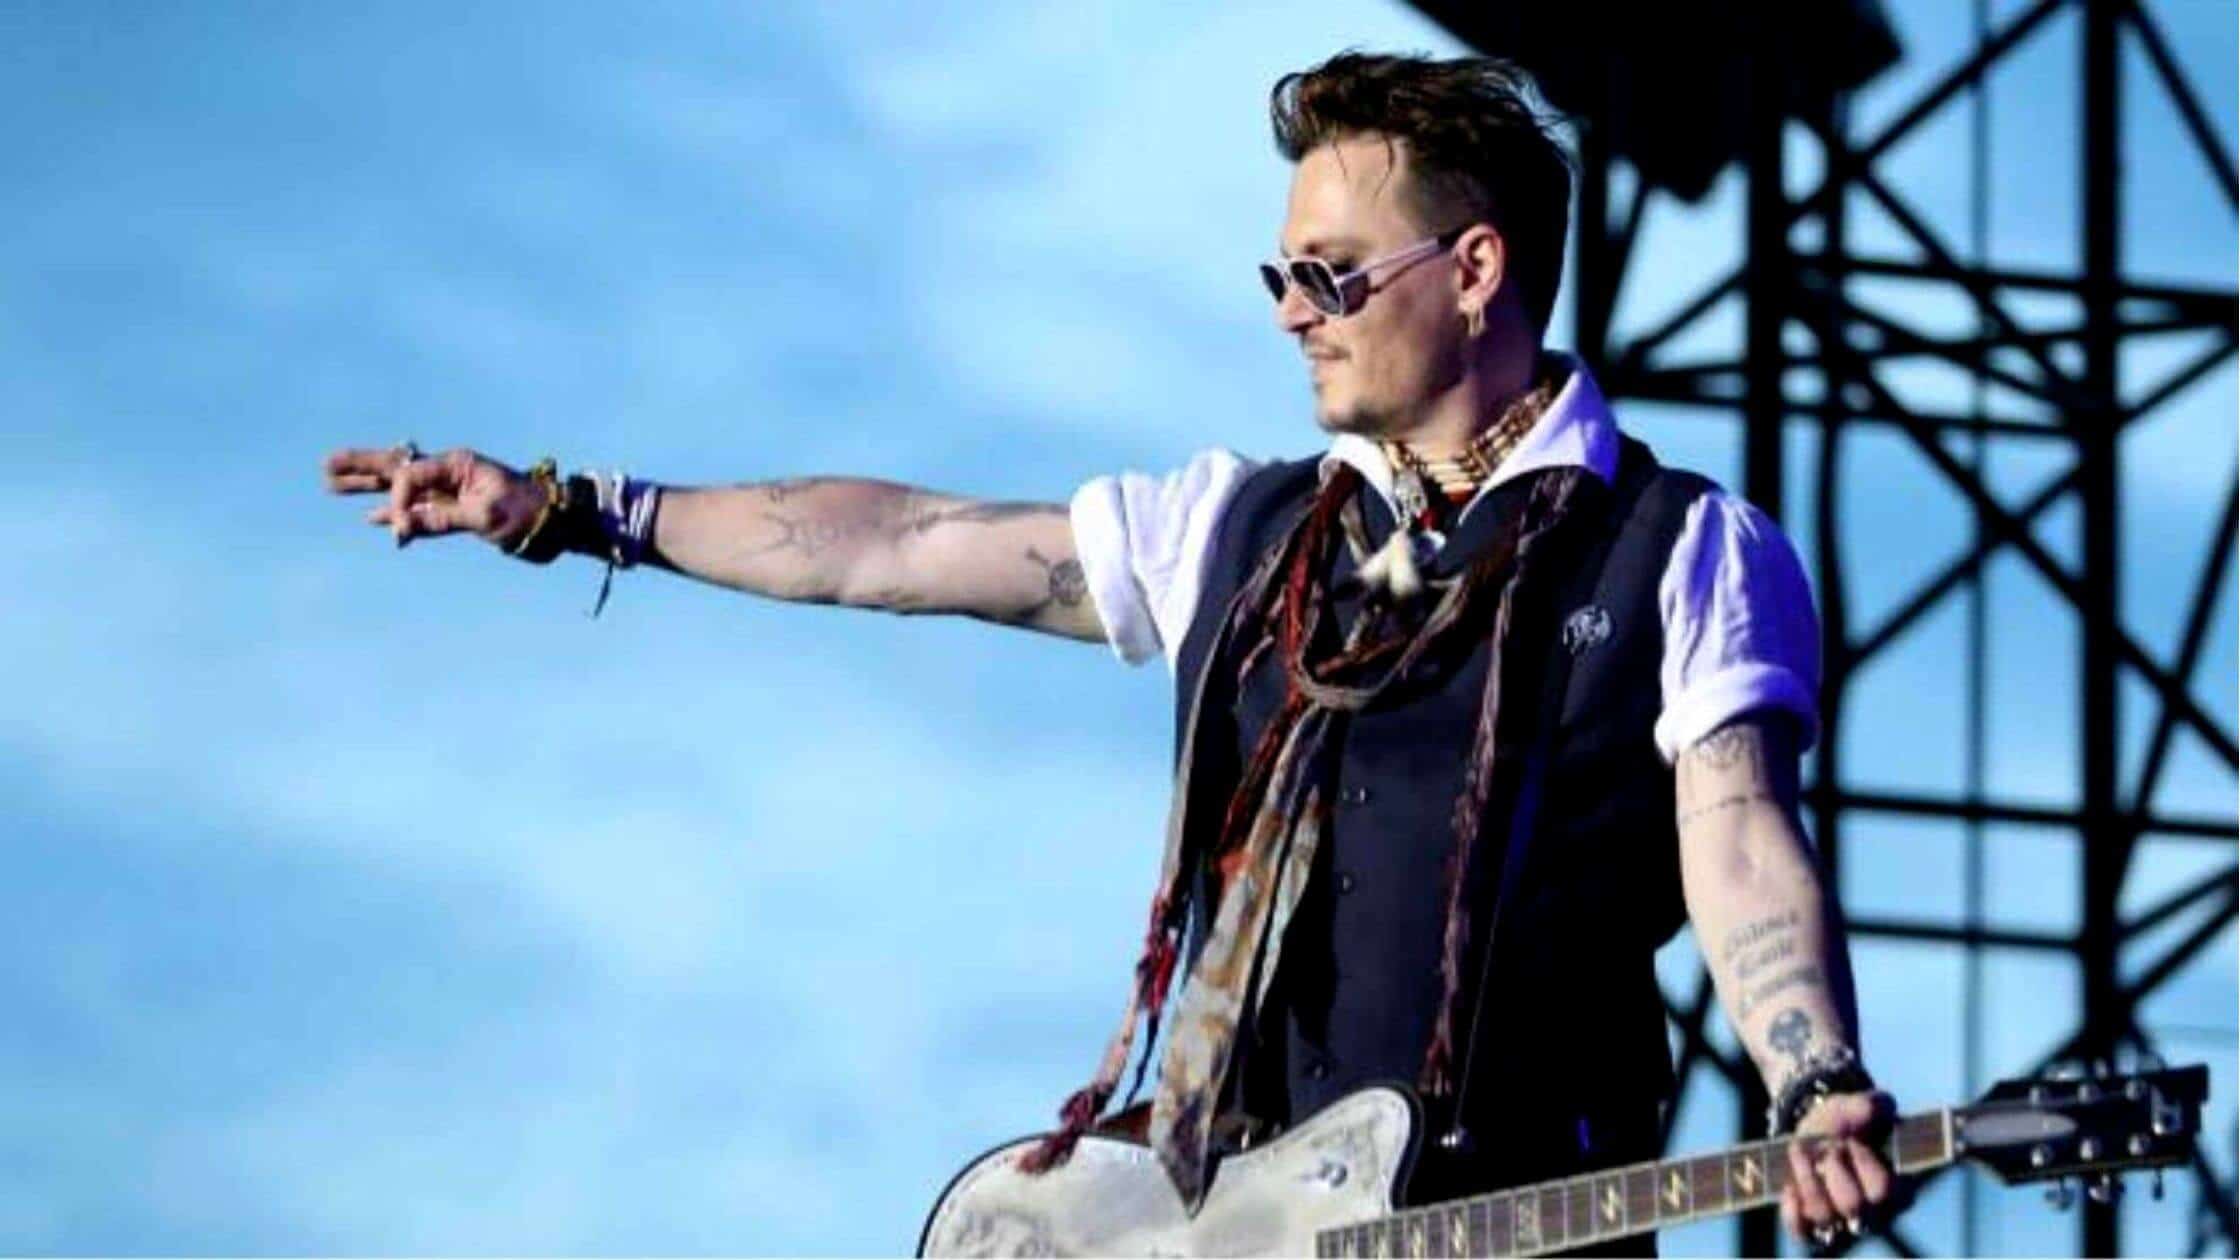 Johnny Depp On Tour In Europe With His Band Hollywood Vampires!